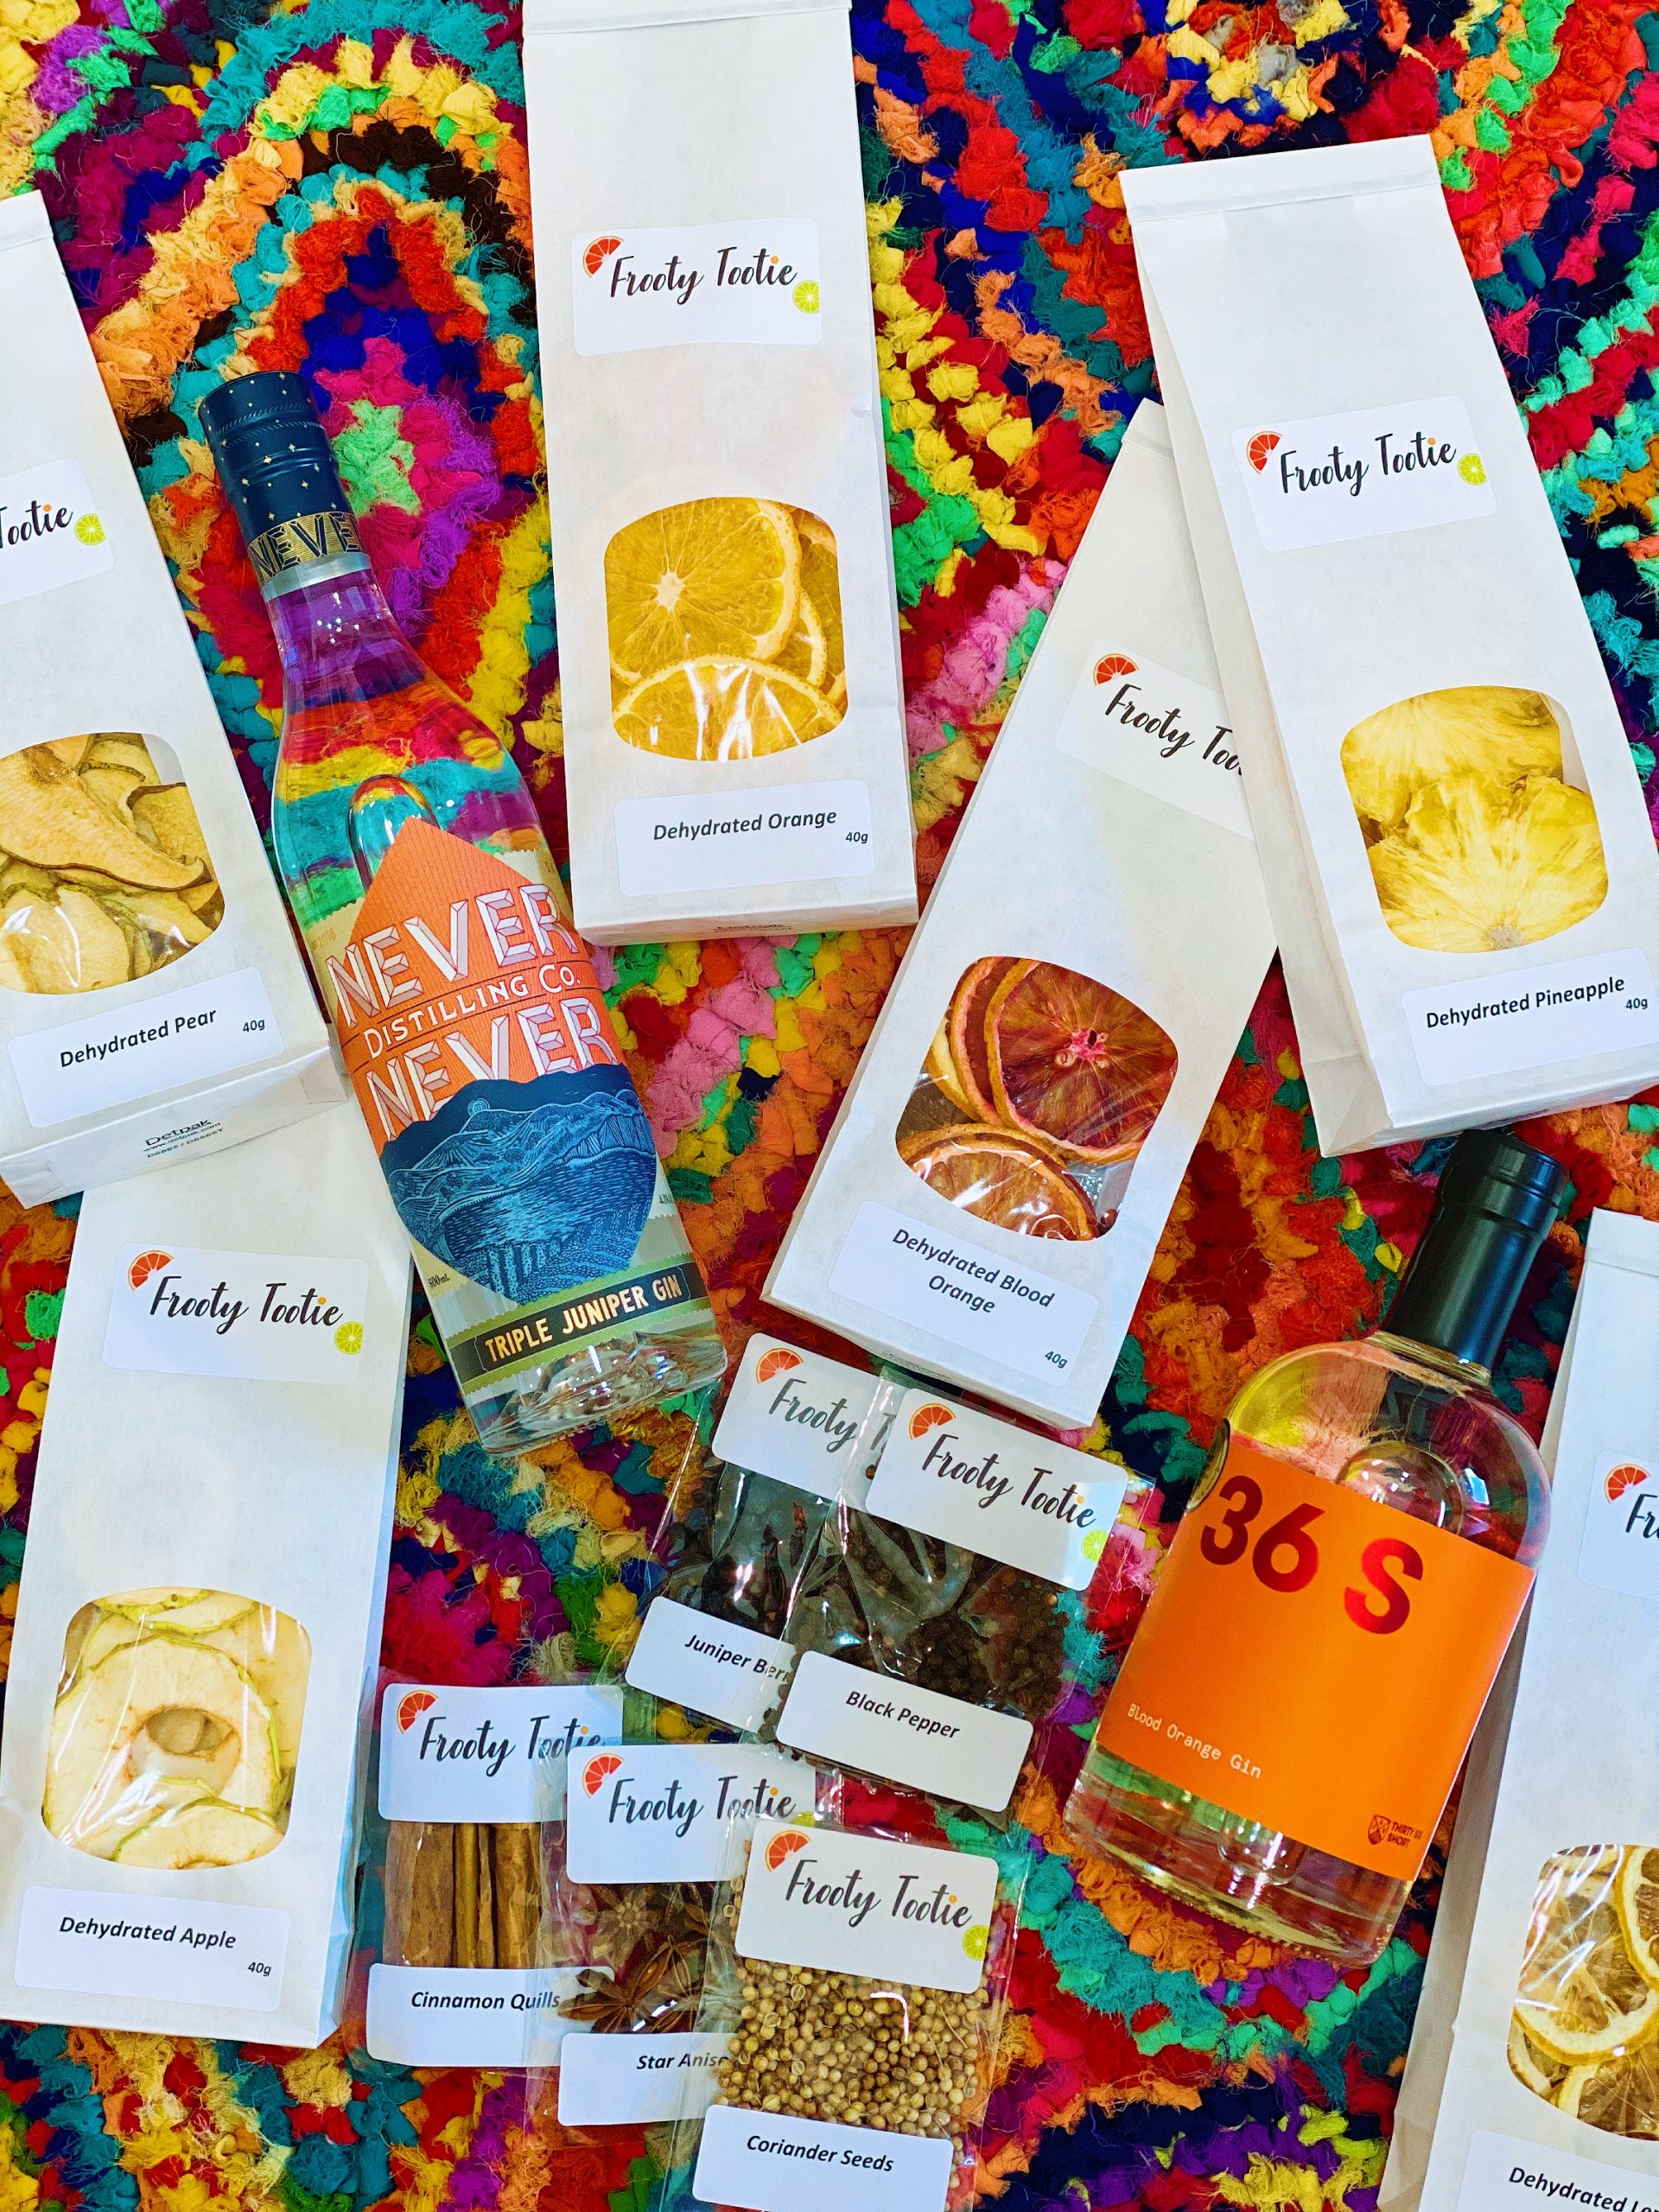 WIN a beautiful gin pack from Frooty Tootie to share with your besties, including two bottles of SA gin